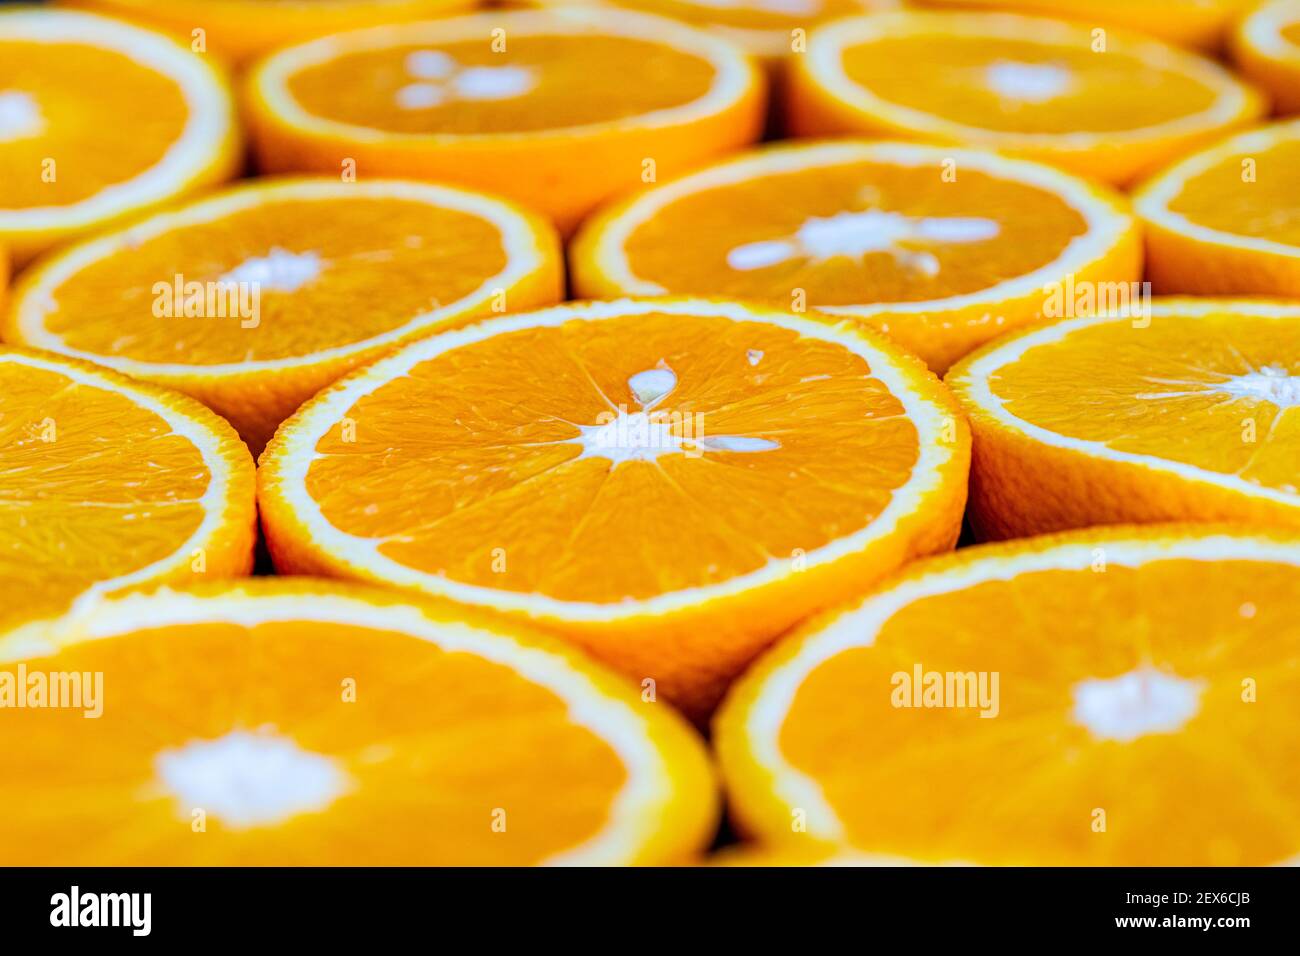 Lots of citrus fruits cut in half to make juice close-up, Stock Photo